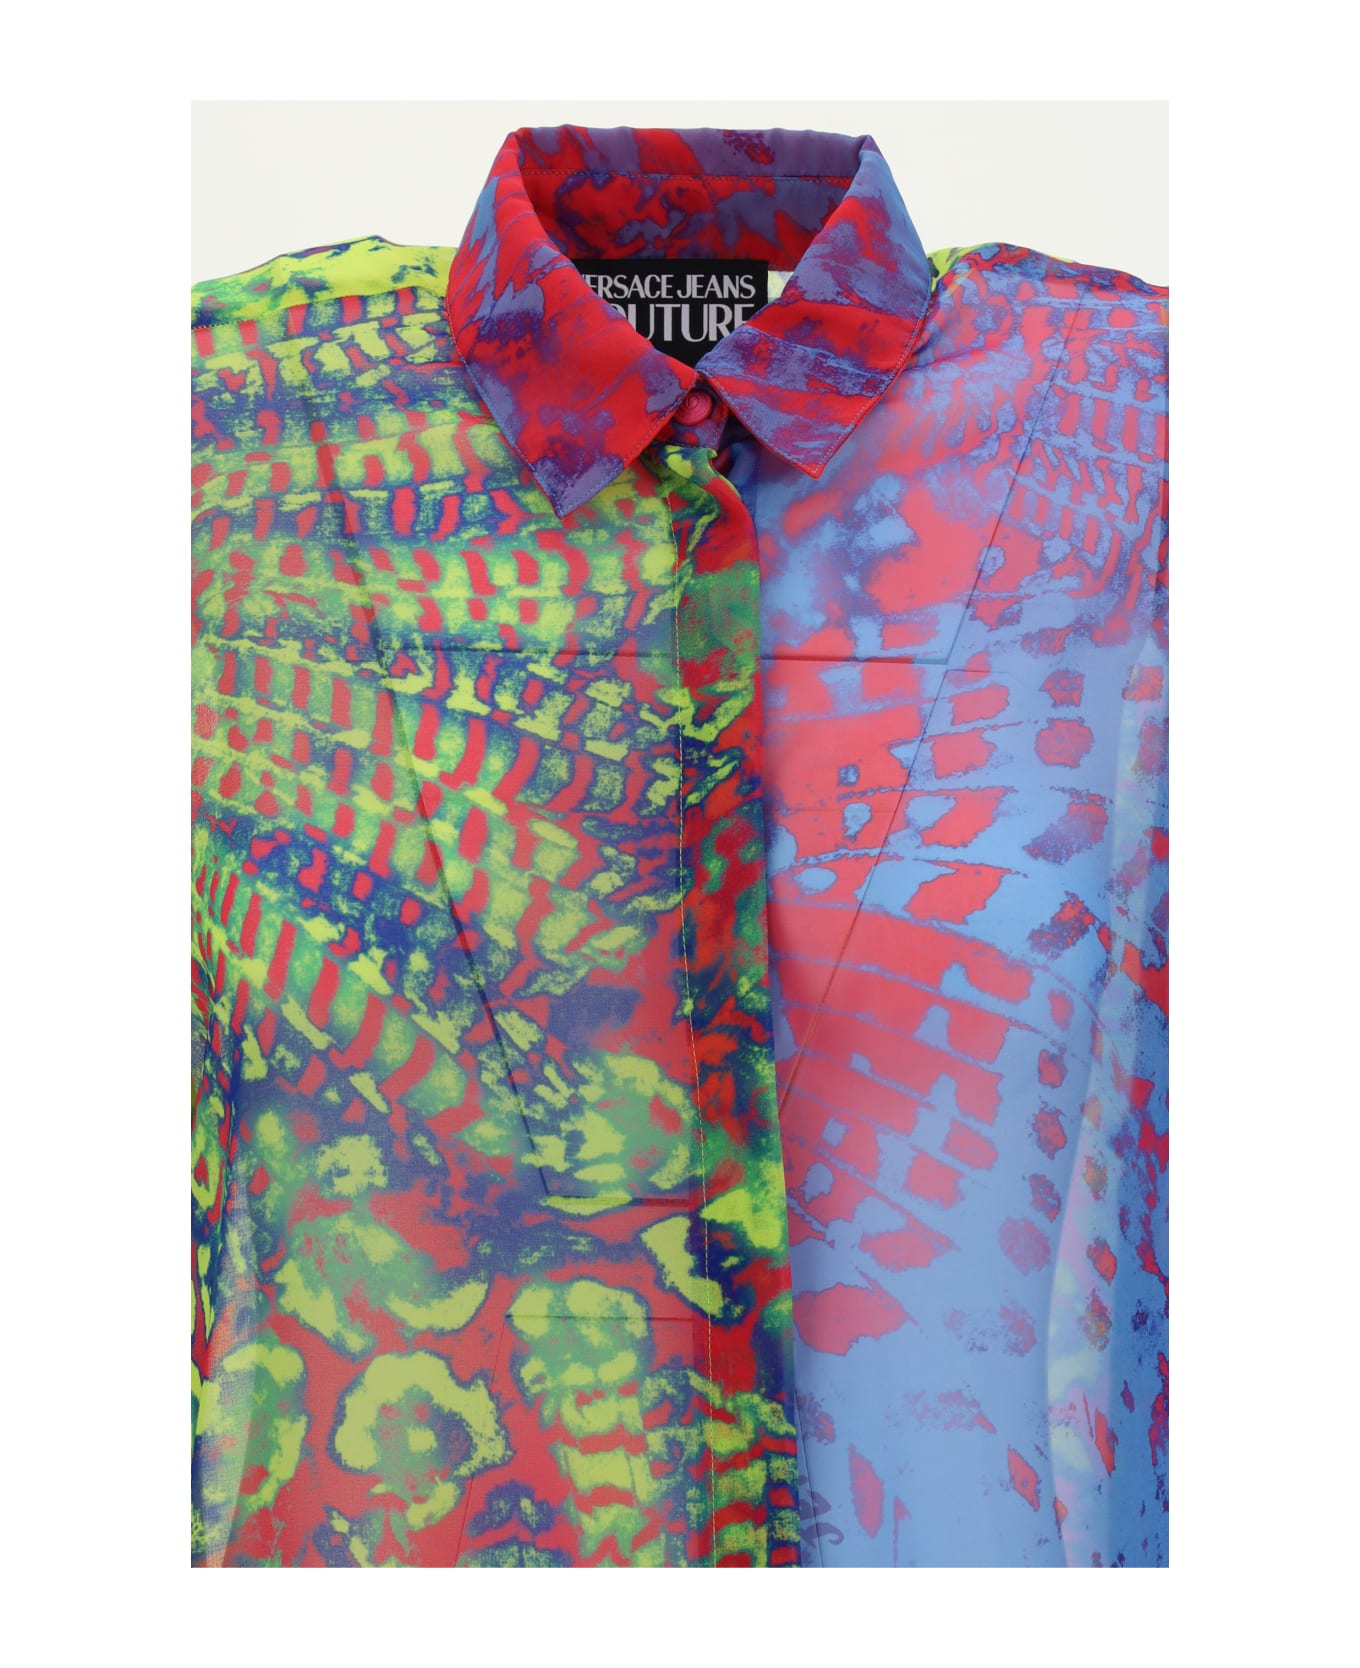 Versace Jeans Couture Shirt - Acid 76 ブラウス